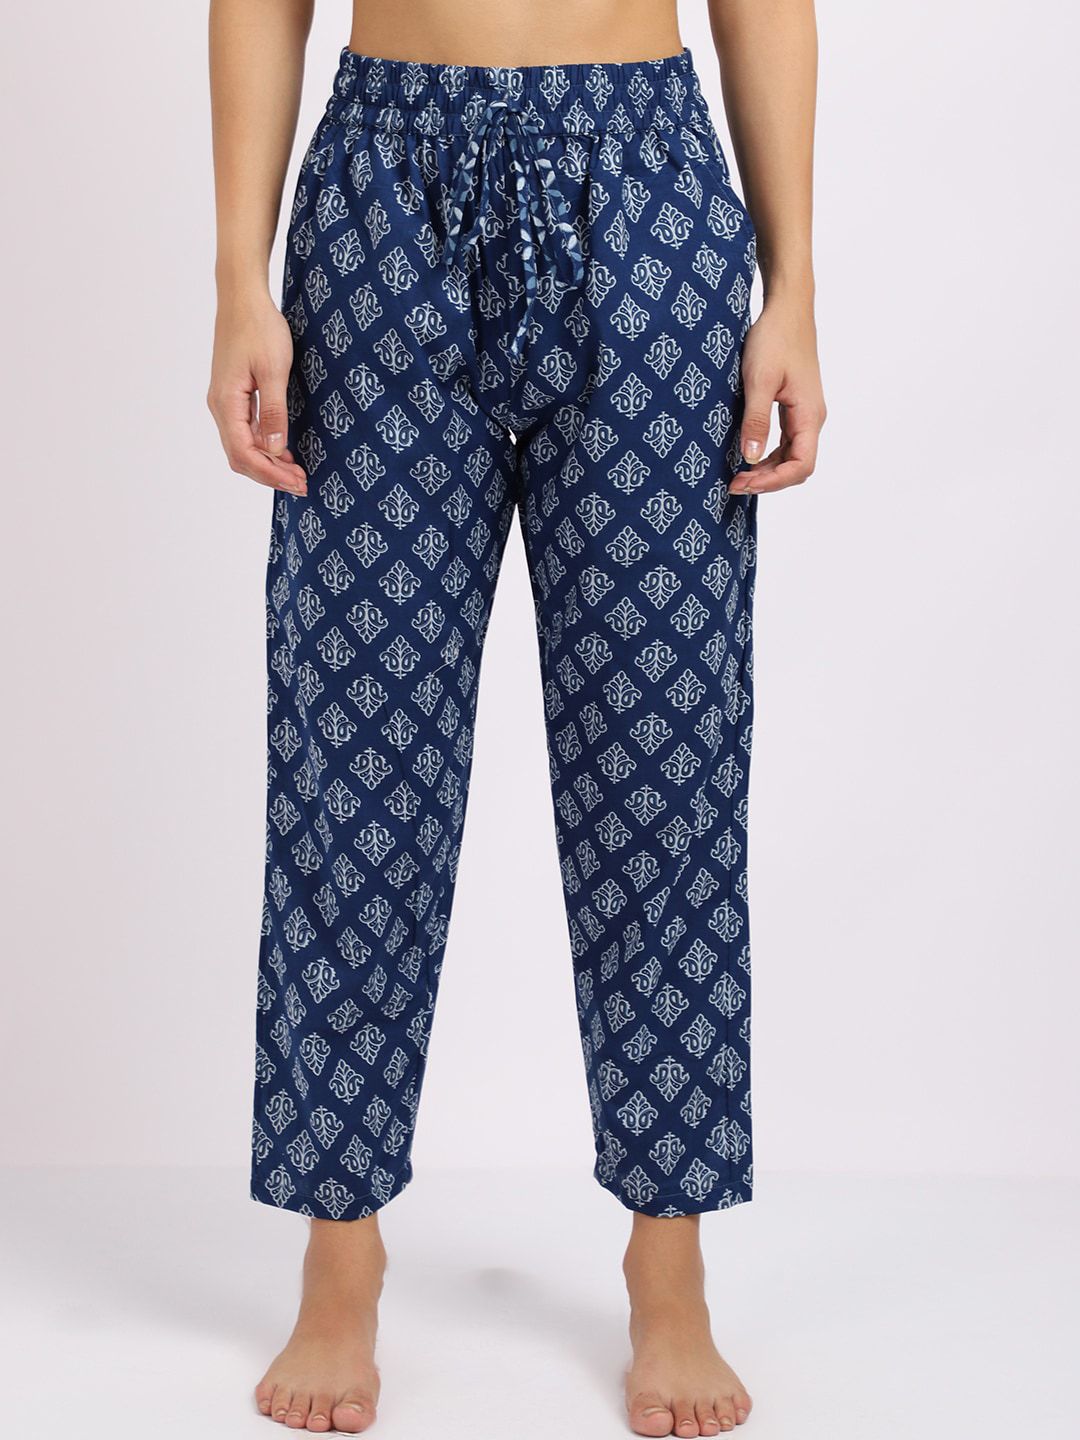 TAG 7 Women Navy Blue & White Printed Cotton Comfort-Fit Lounge Pants Price in India